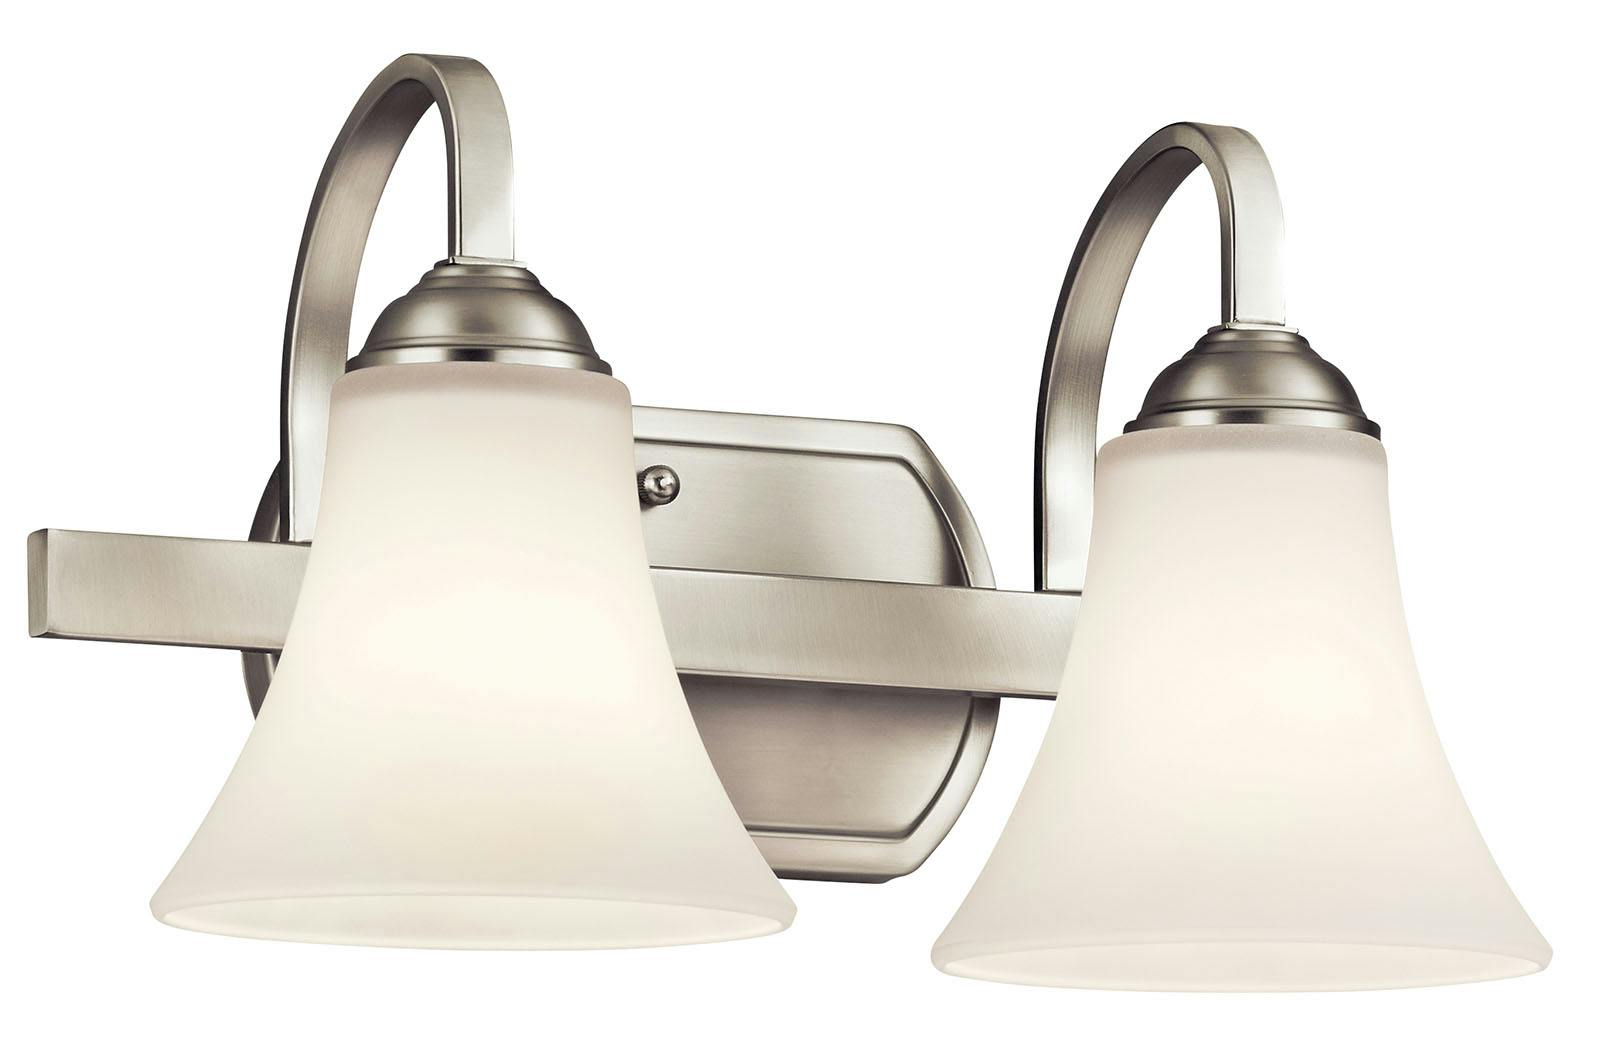 Keiran 14" 2 Light Vanity Light in Nickel on a white background